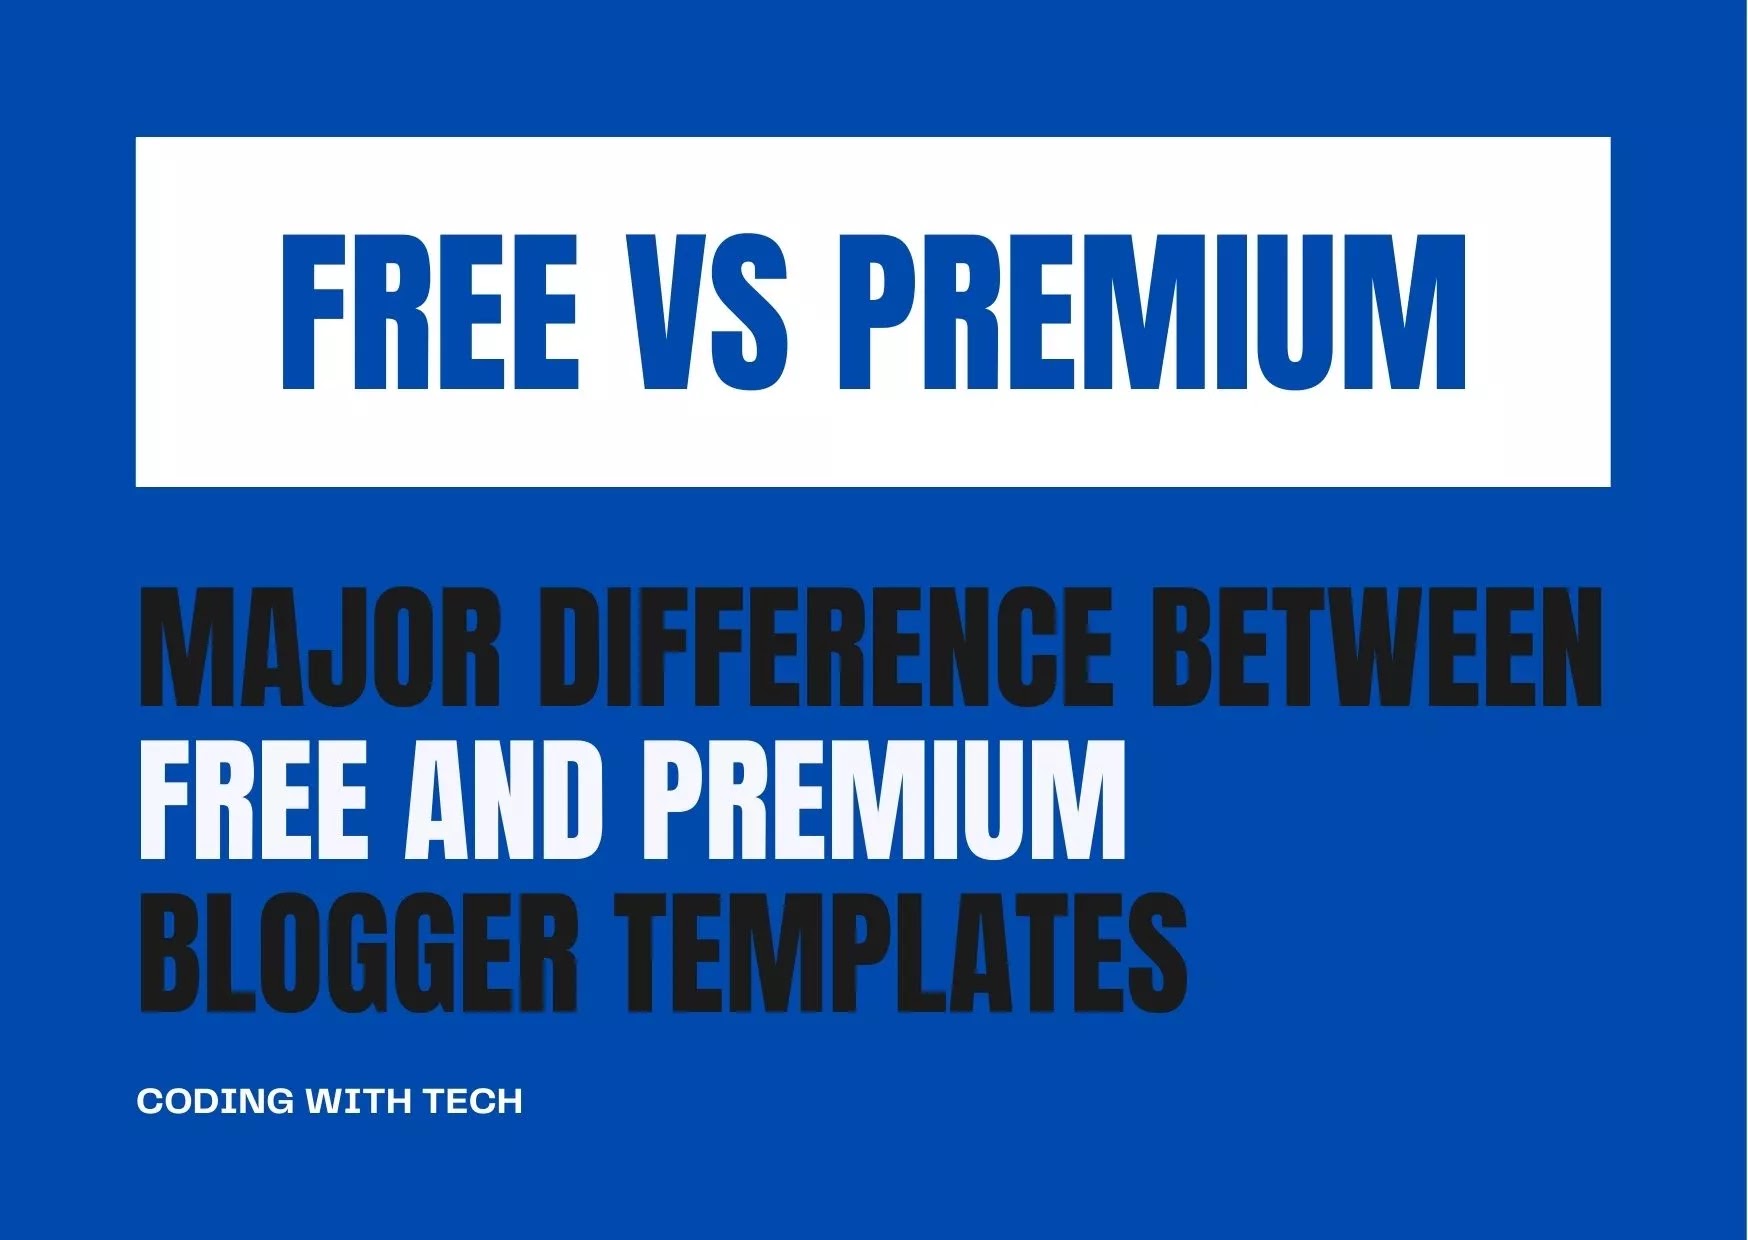 Major Differences Between Free and Premium Blogger Template - Pros and Cons, Blogger Free Templates Pros and Cons, Blogger Premium Templates Pros and Cons